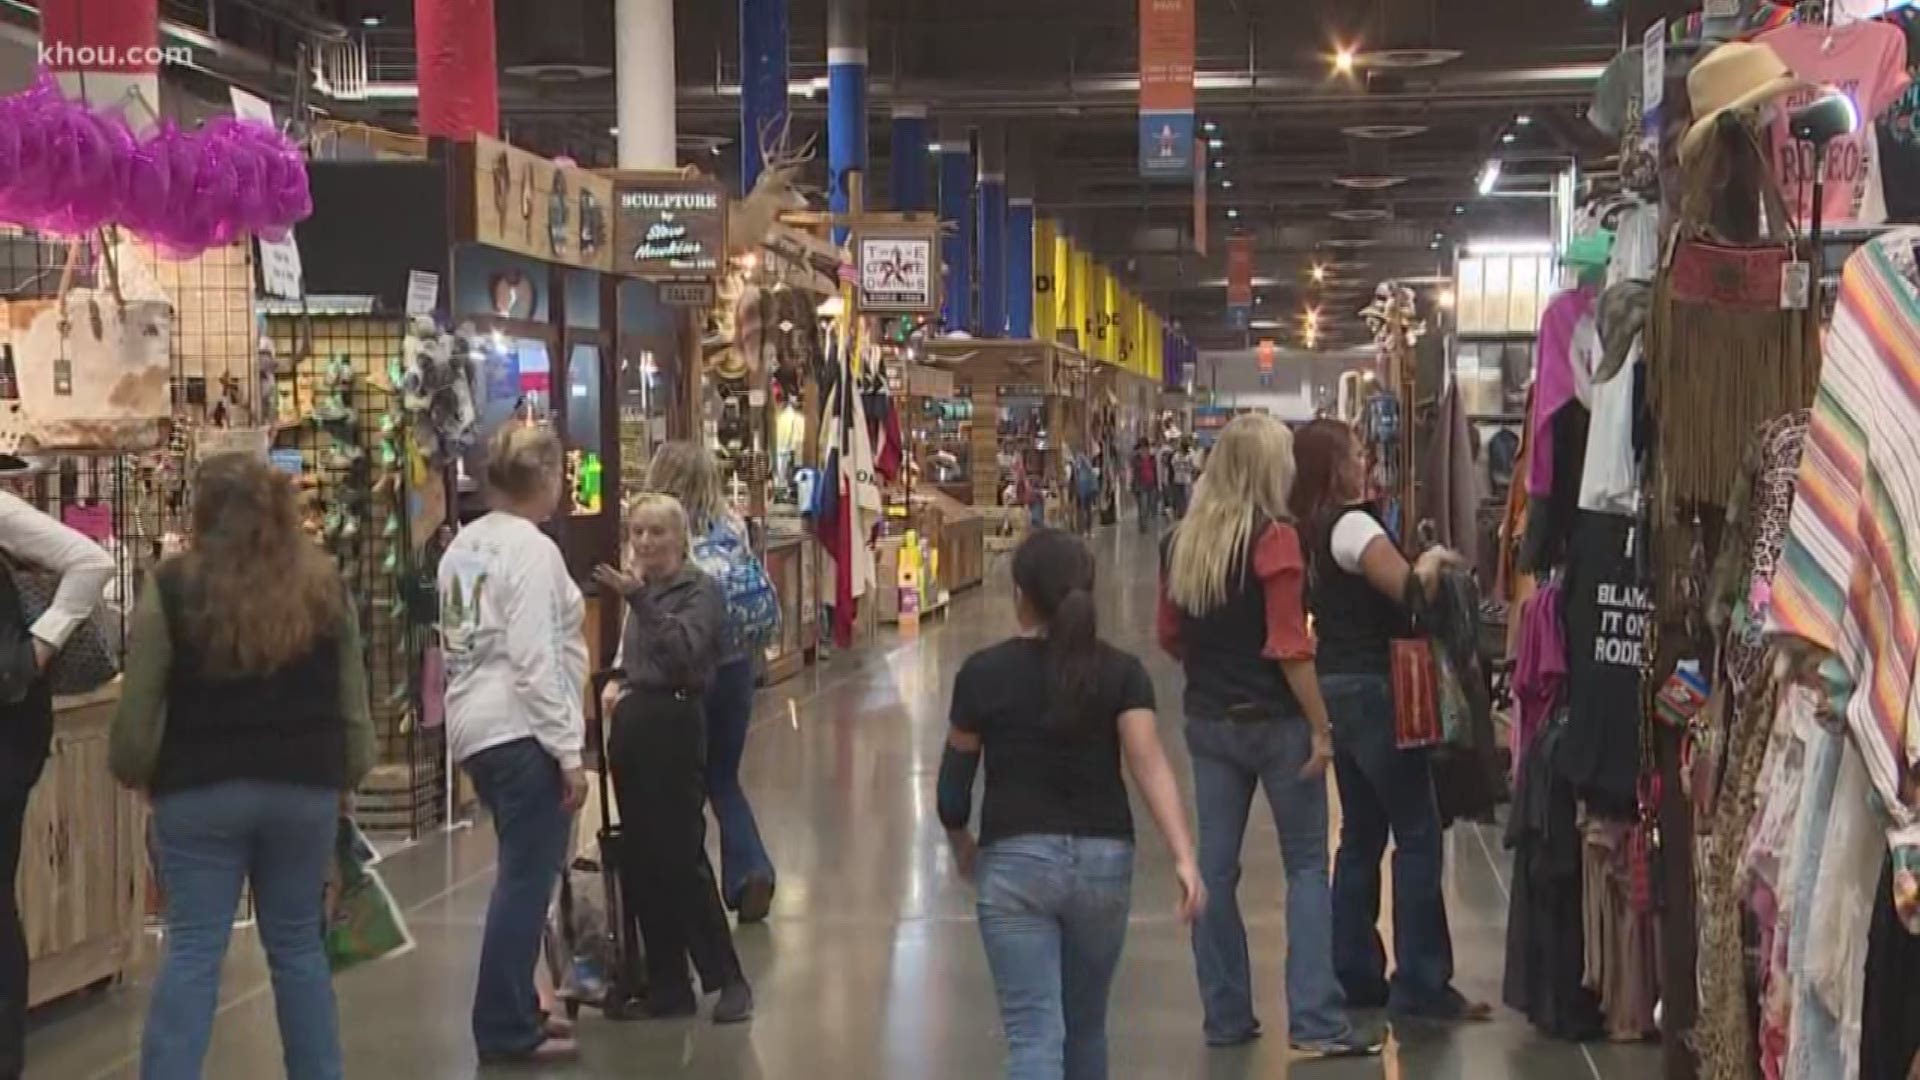 The decision to cancel the Houston Livestock Show & Rodeo took vendors and attendees by surprise Wednesday.